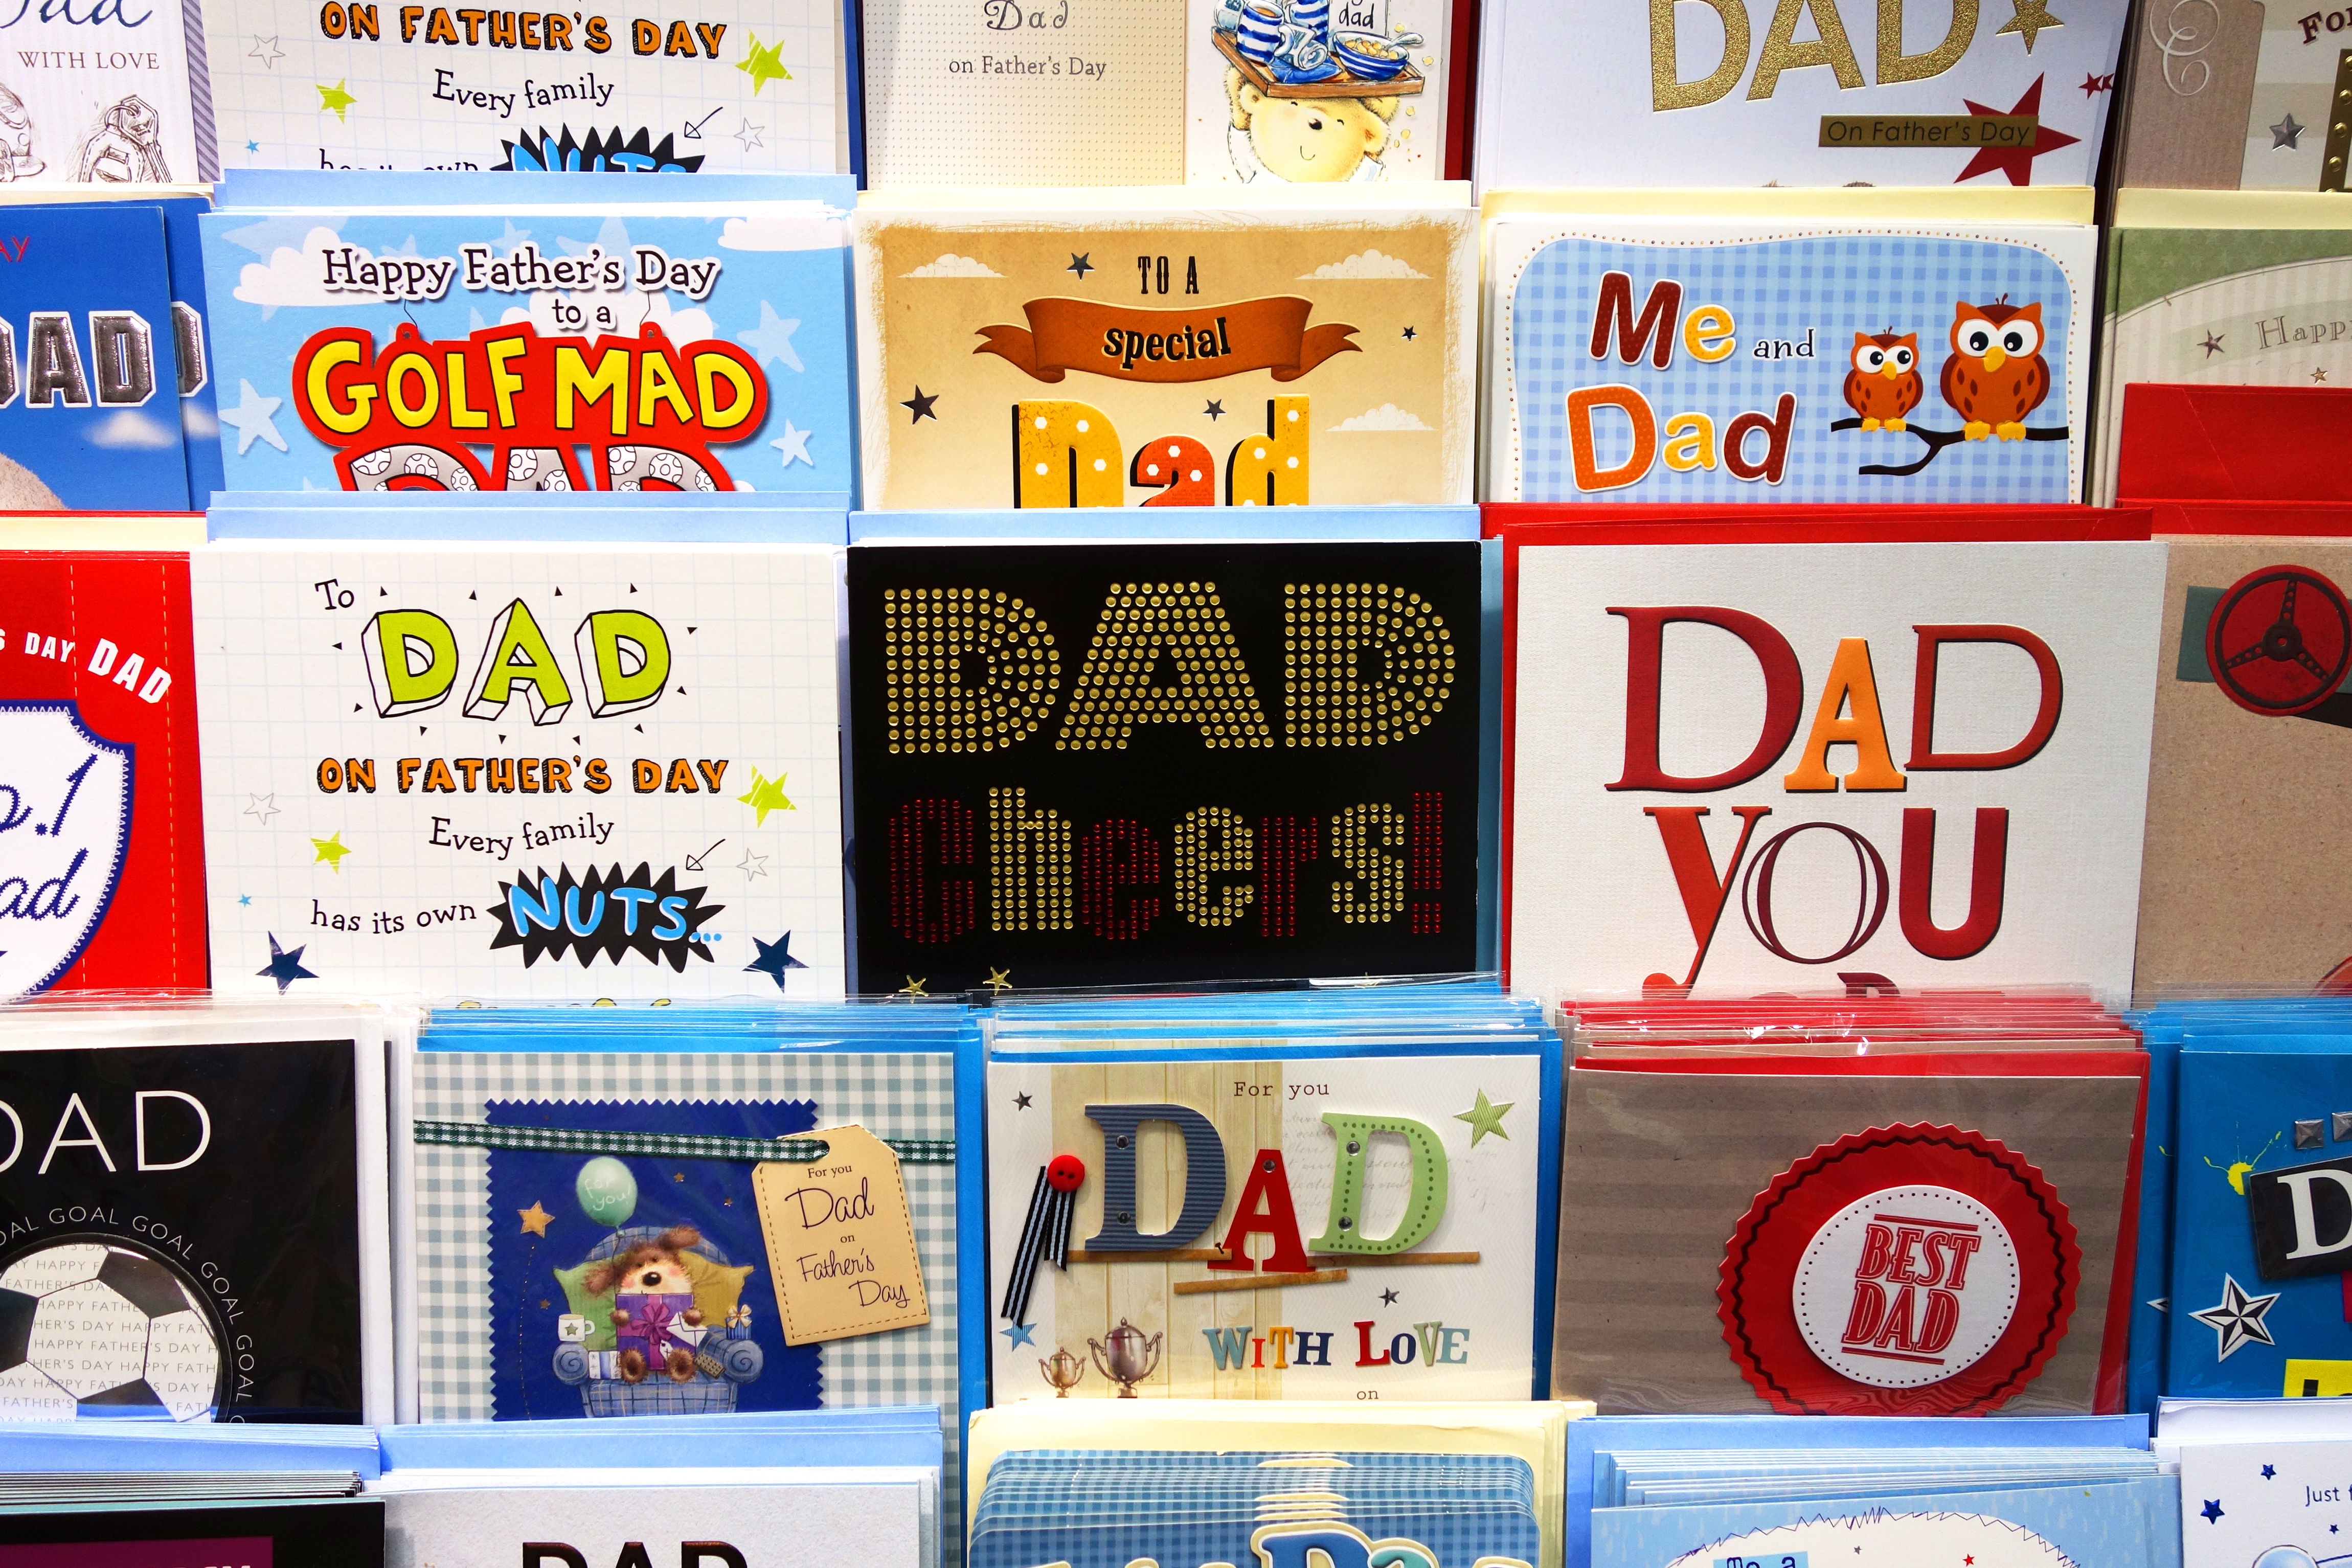 A display of Fathers Day cards.